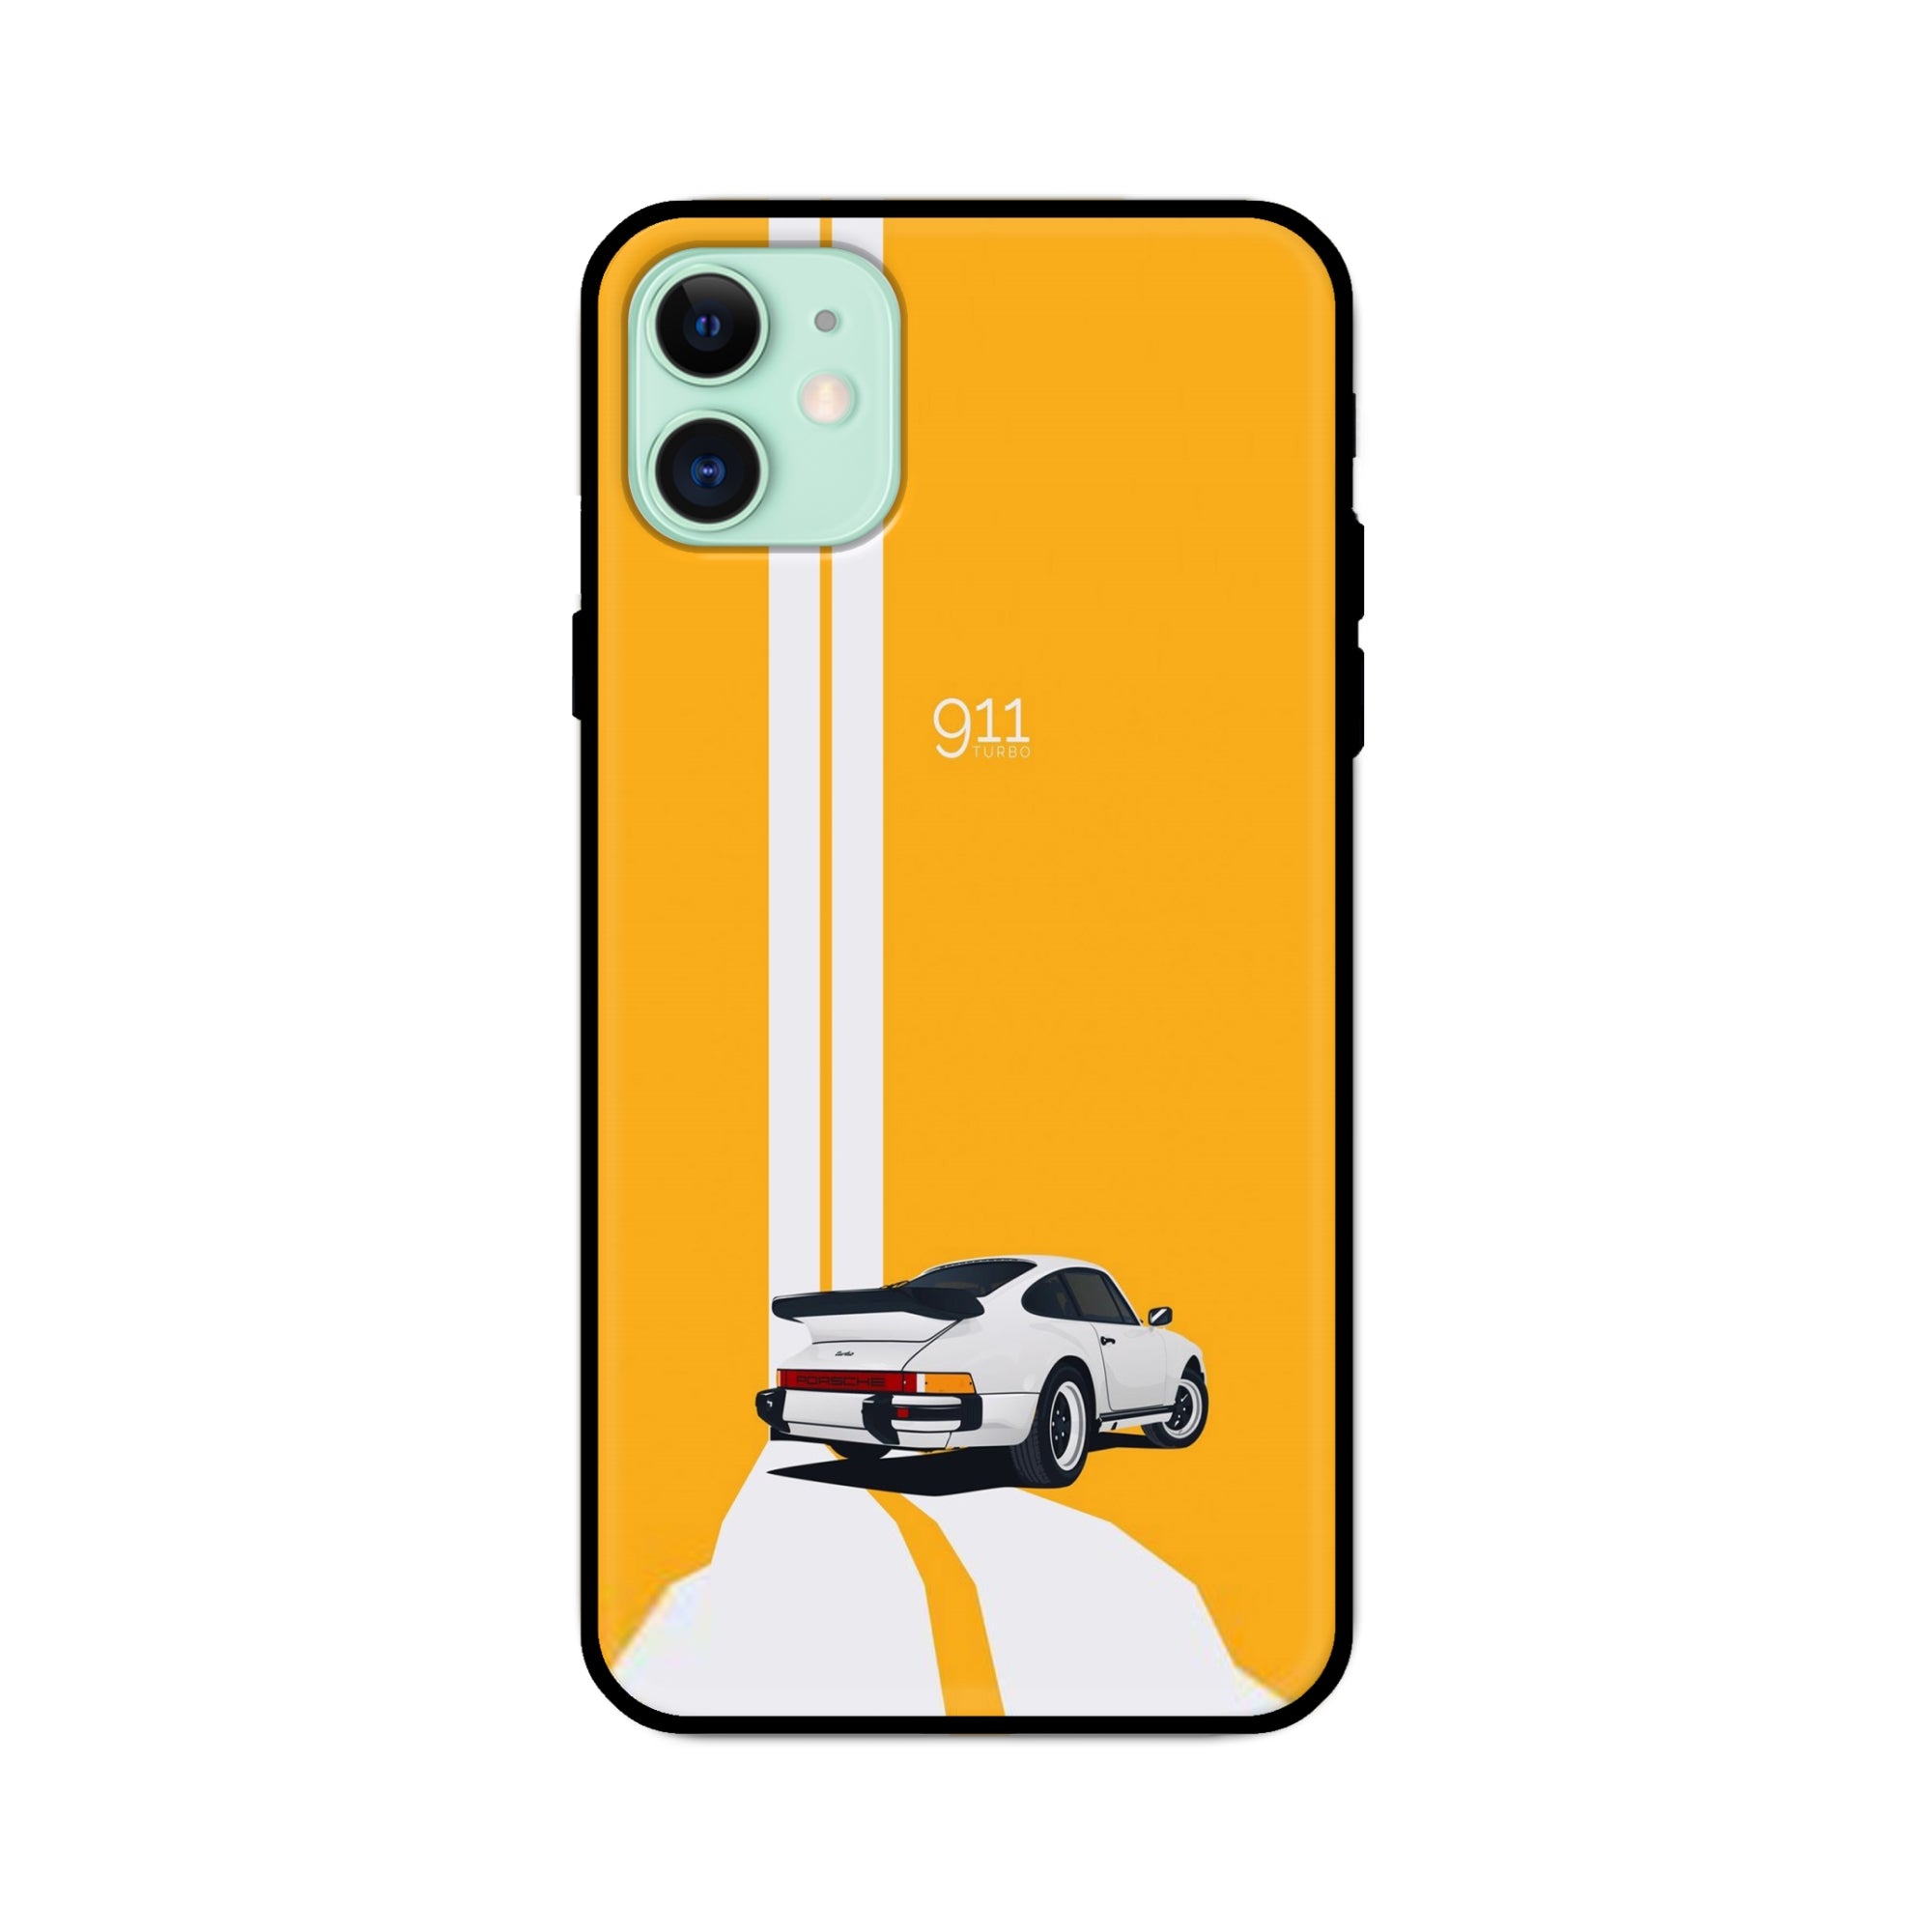 Buy 911 Gt Porche Glass/Metal Back Mobile Phone Case/Cover For iPhone 11 Online